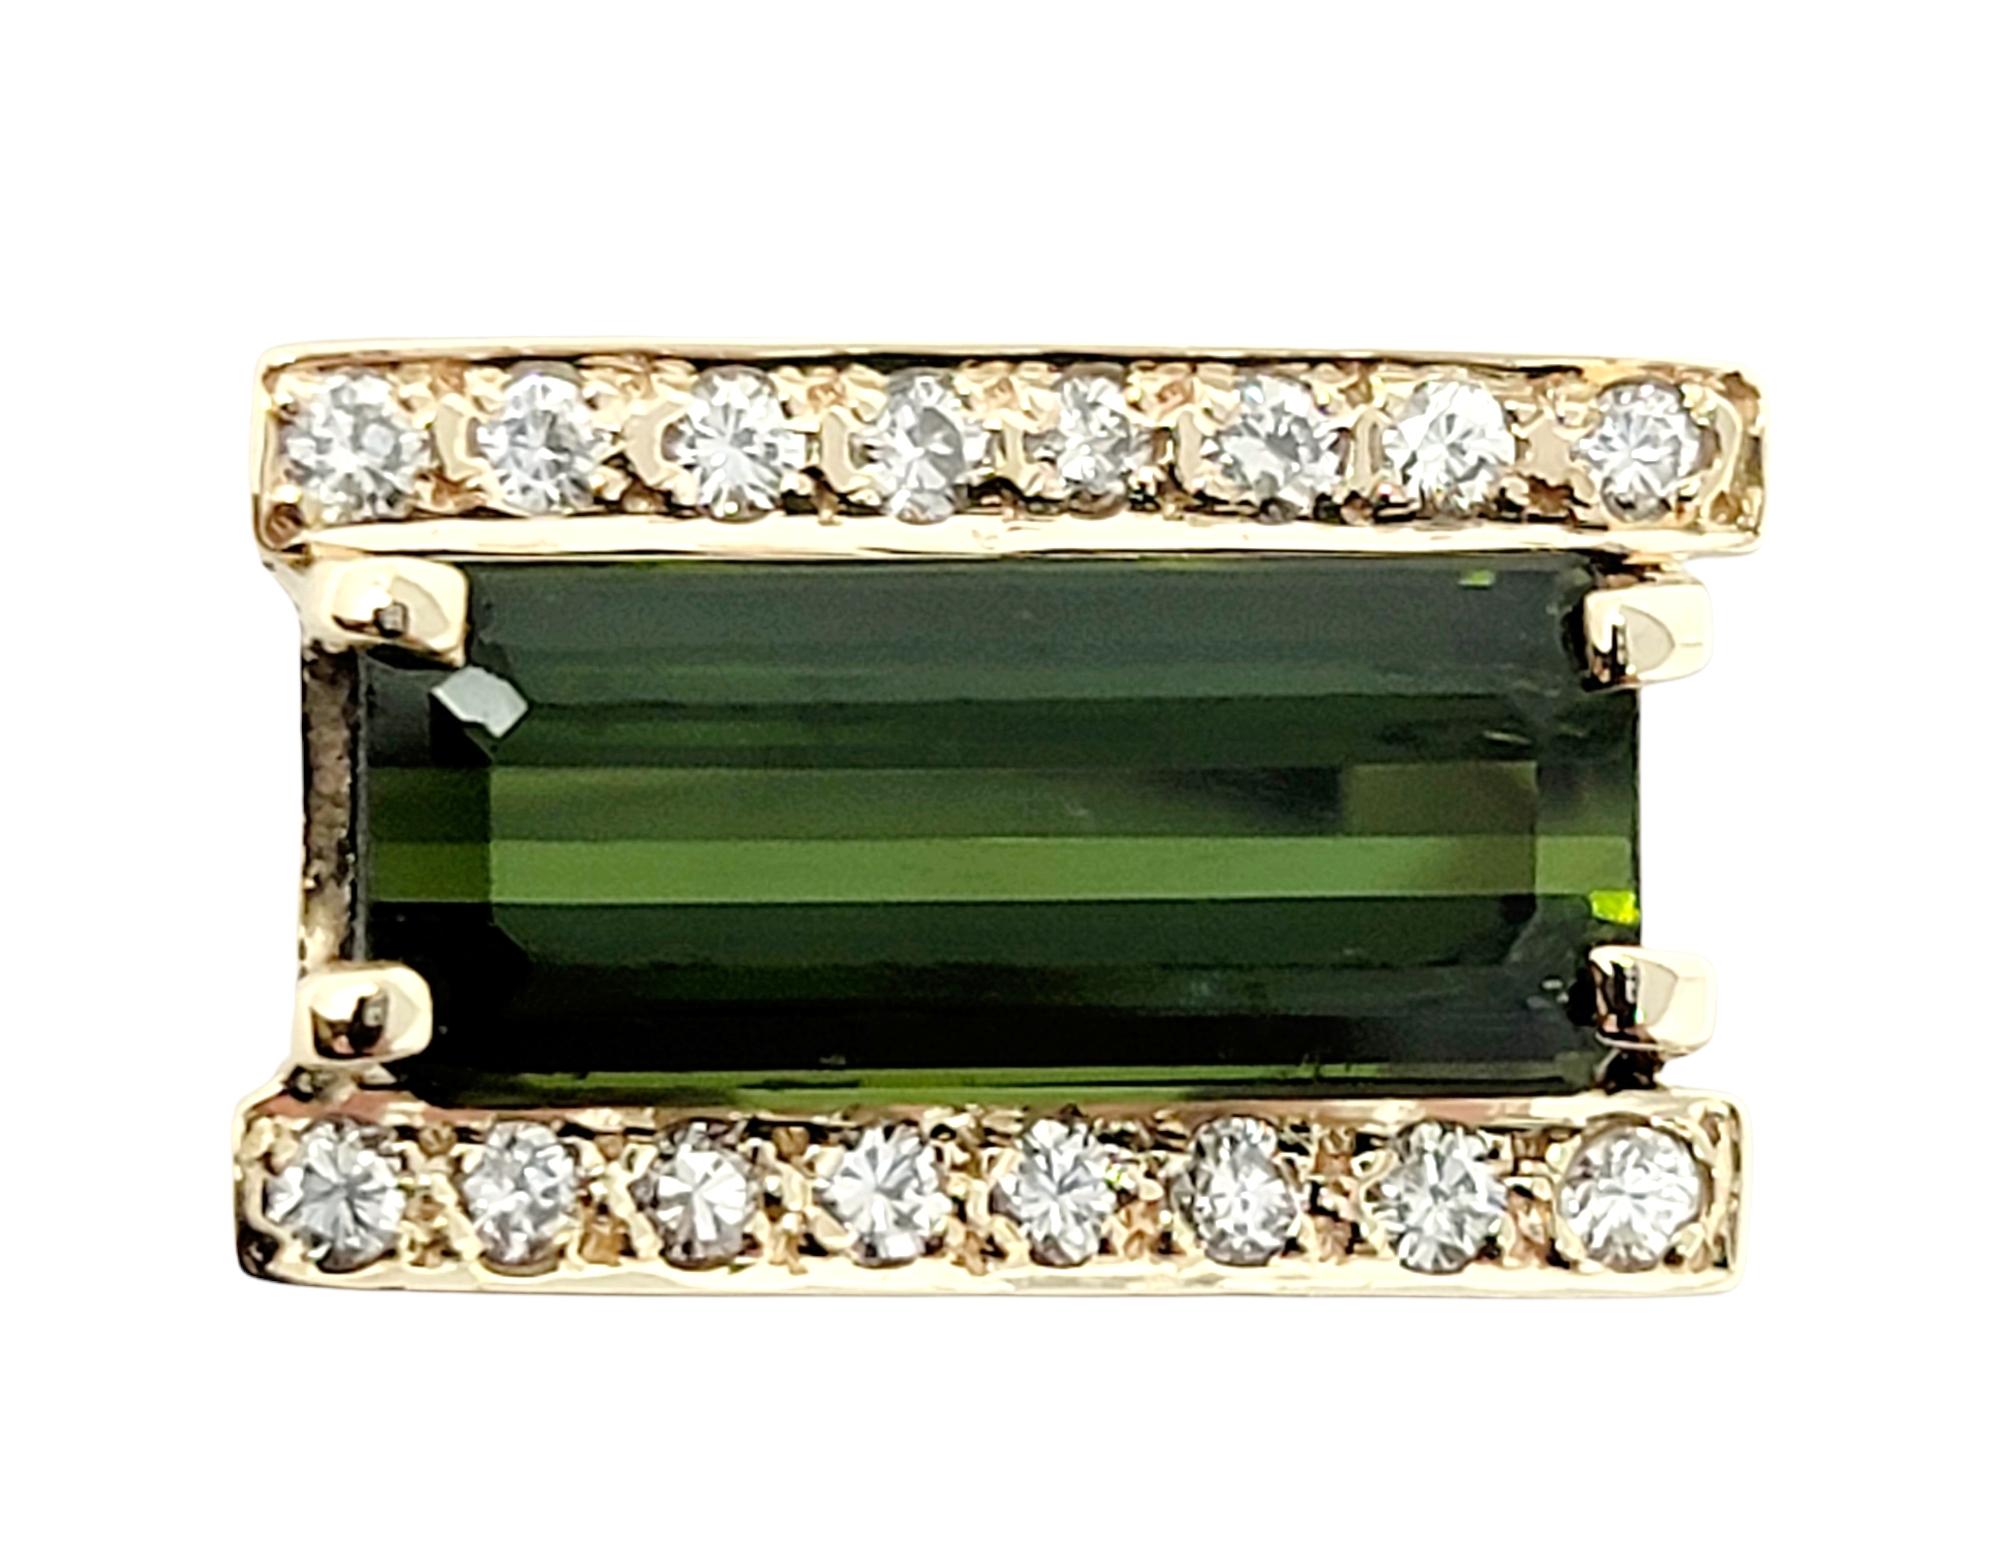 Ring size: 6.25

Gorgeous contemporary green tourmaline and pave diamond ring. The rectangular step cut green tourmaline stone sits at the very center of the piece in a horizontal layout and is surrounded on either side by glittering natural